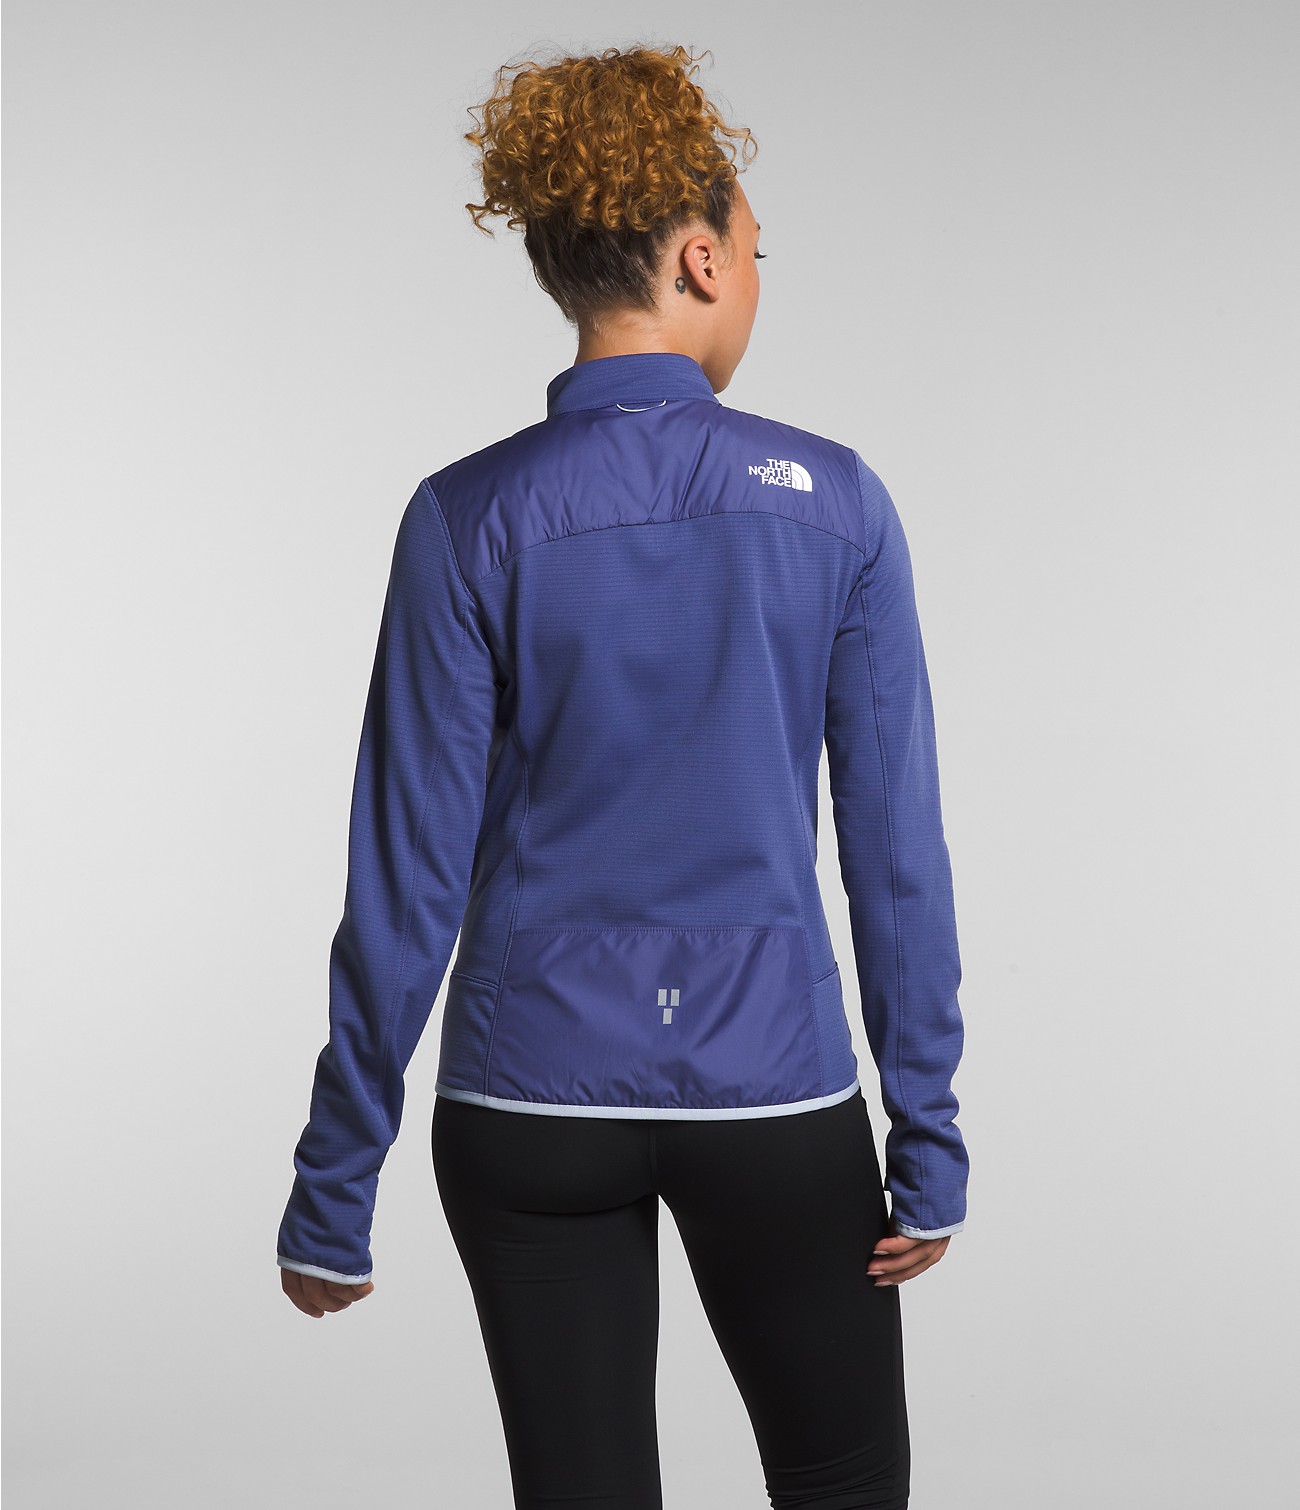 Women’s Winter Warm Pro Jacket | The North Face